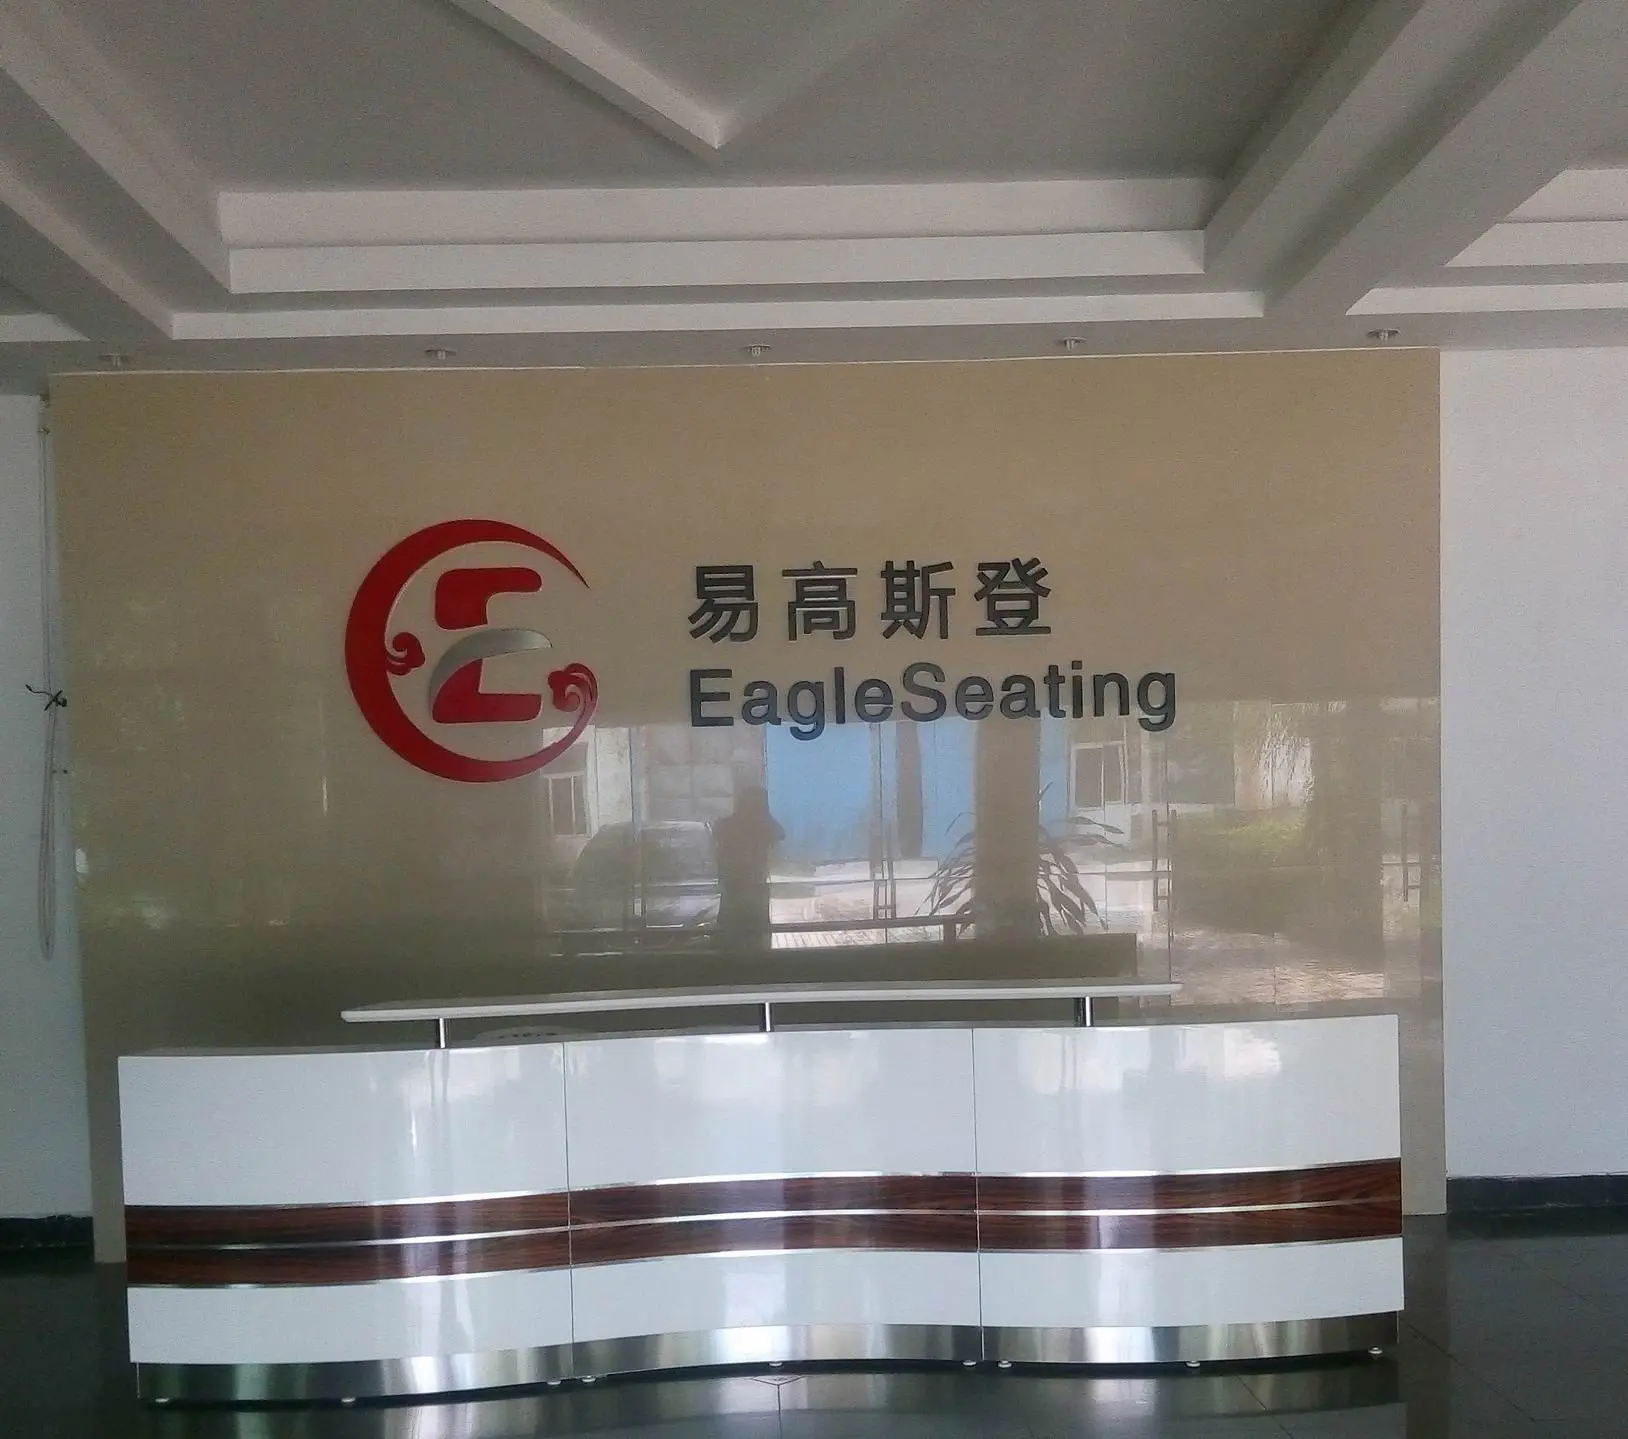 The Reception of EagleSeating